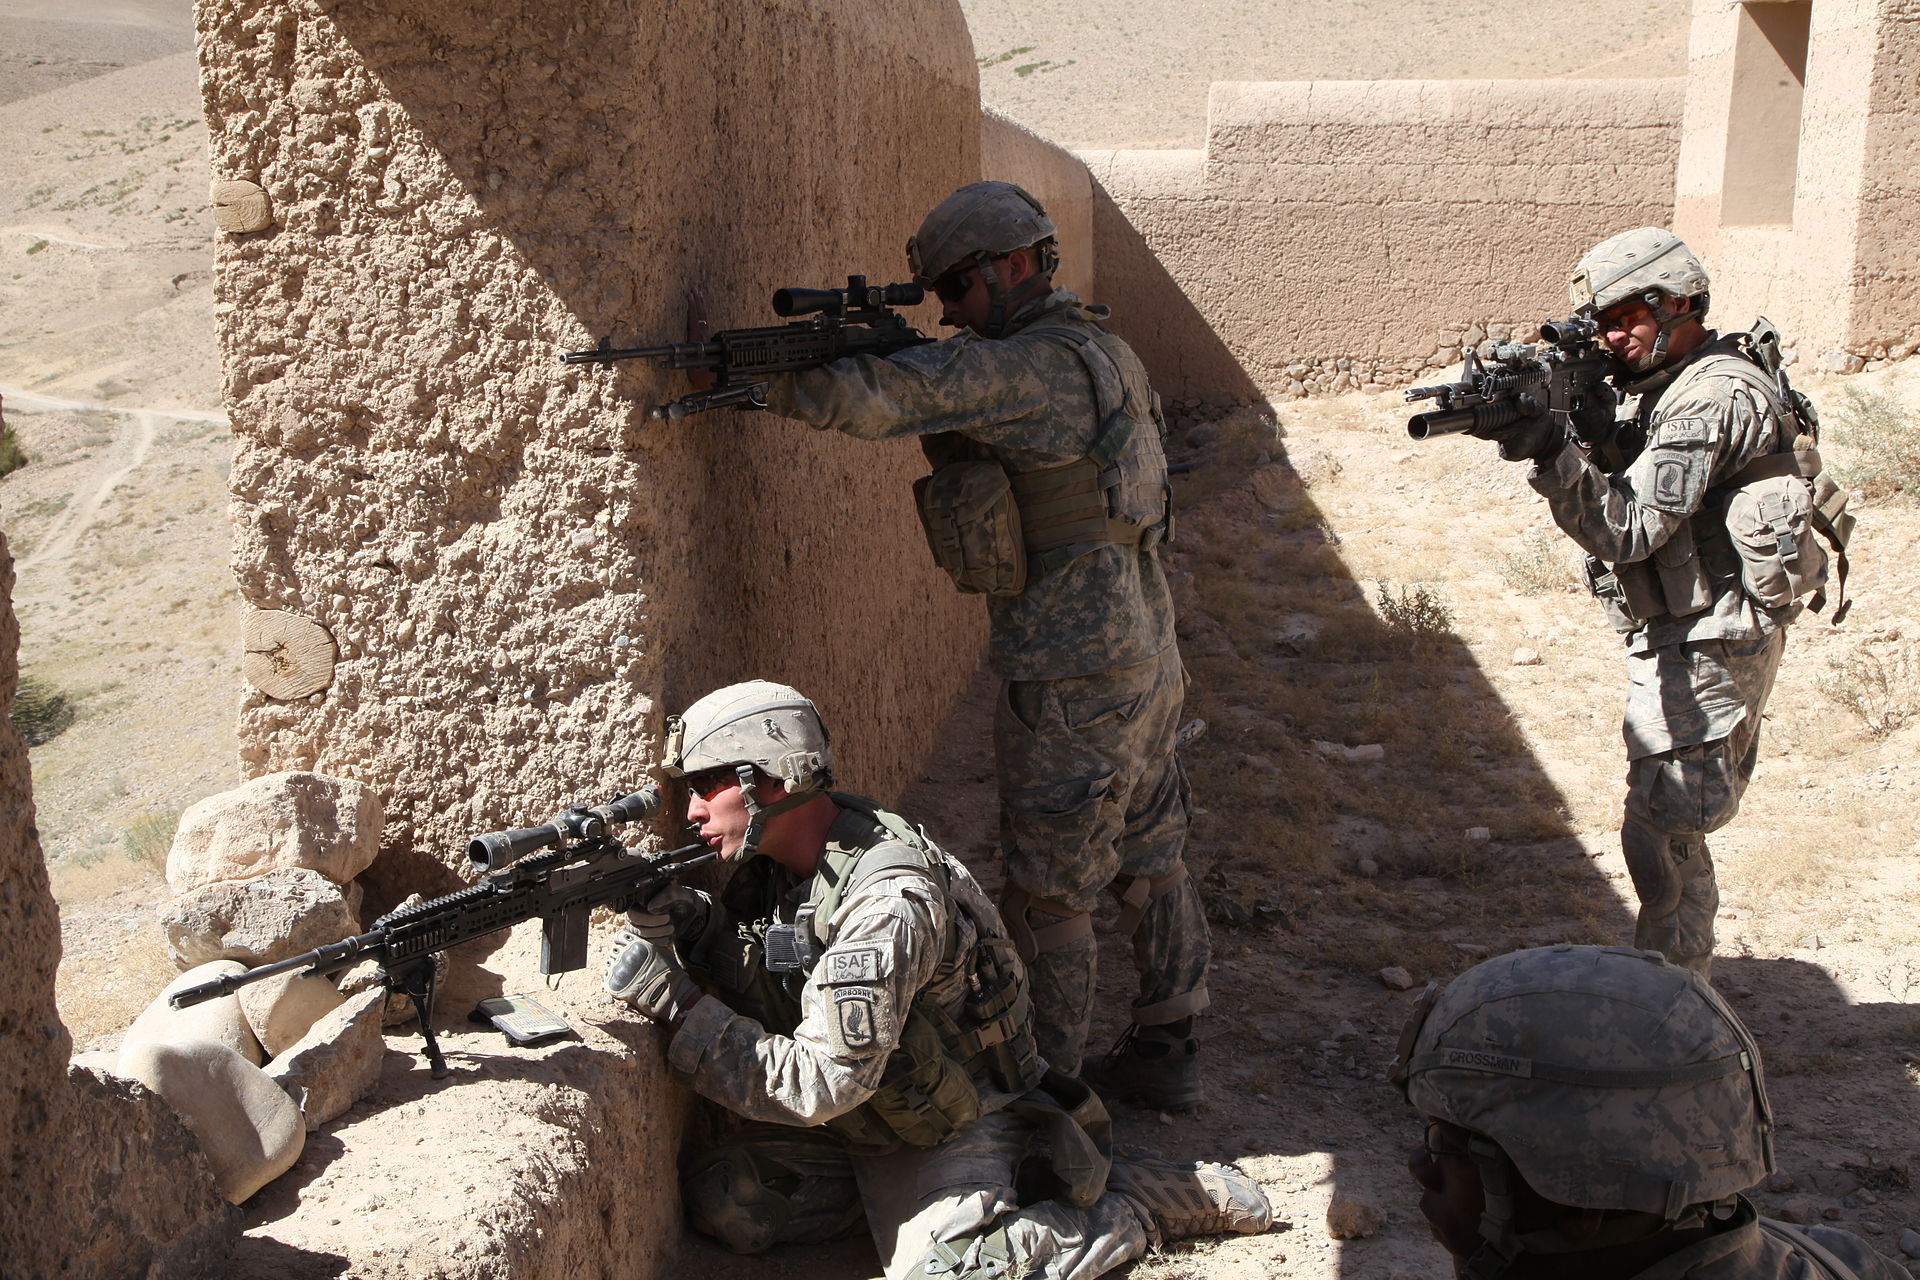 1920px-503rd_Infantry_Rgt__prepare_to_engage_enemy_in_Chaki_Wardak_District_2010-09-25.jpg